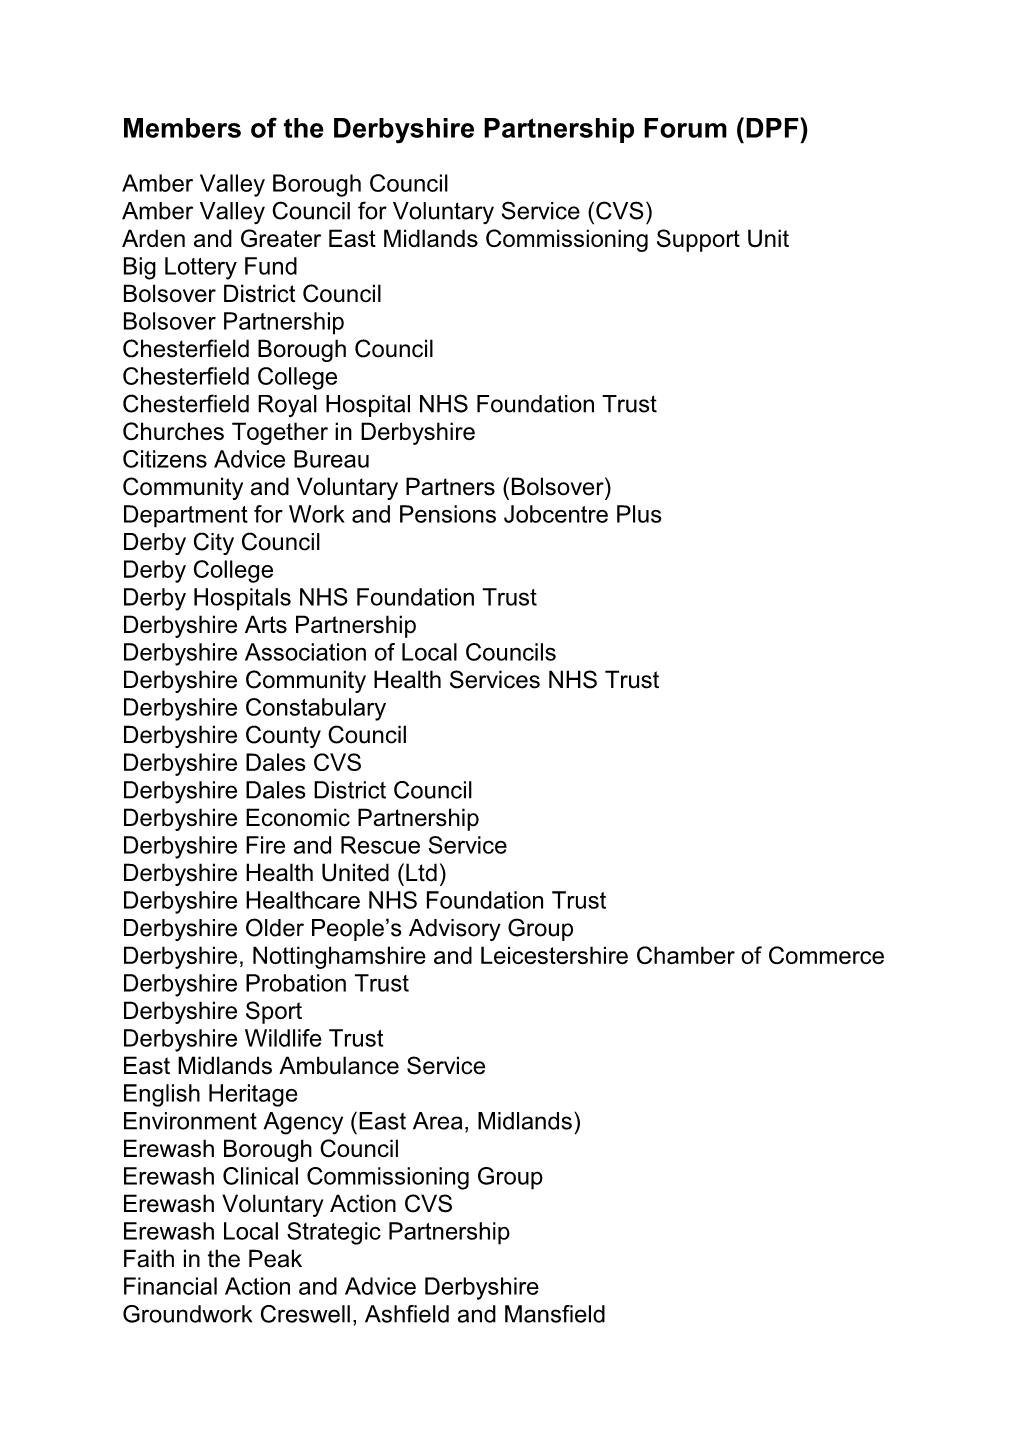 Partner Organisations Represented on The